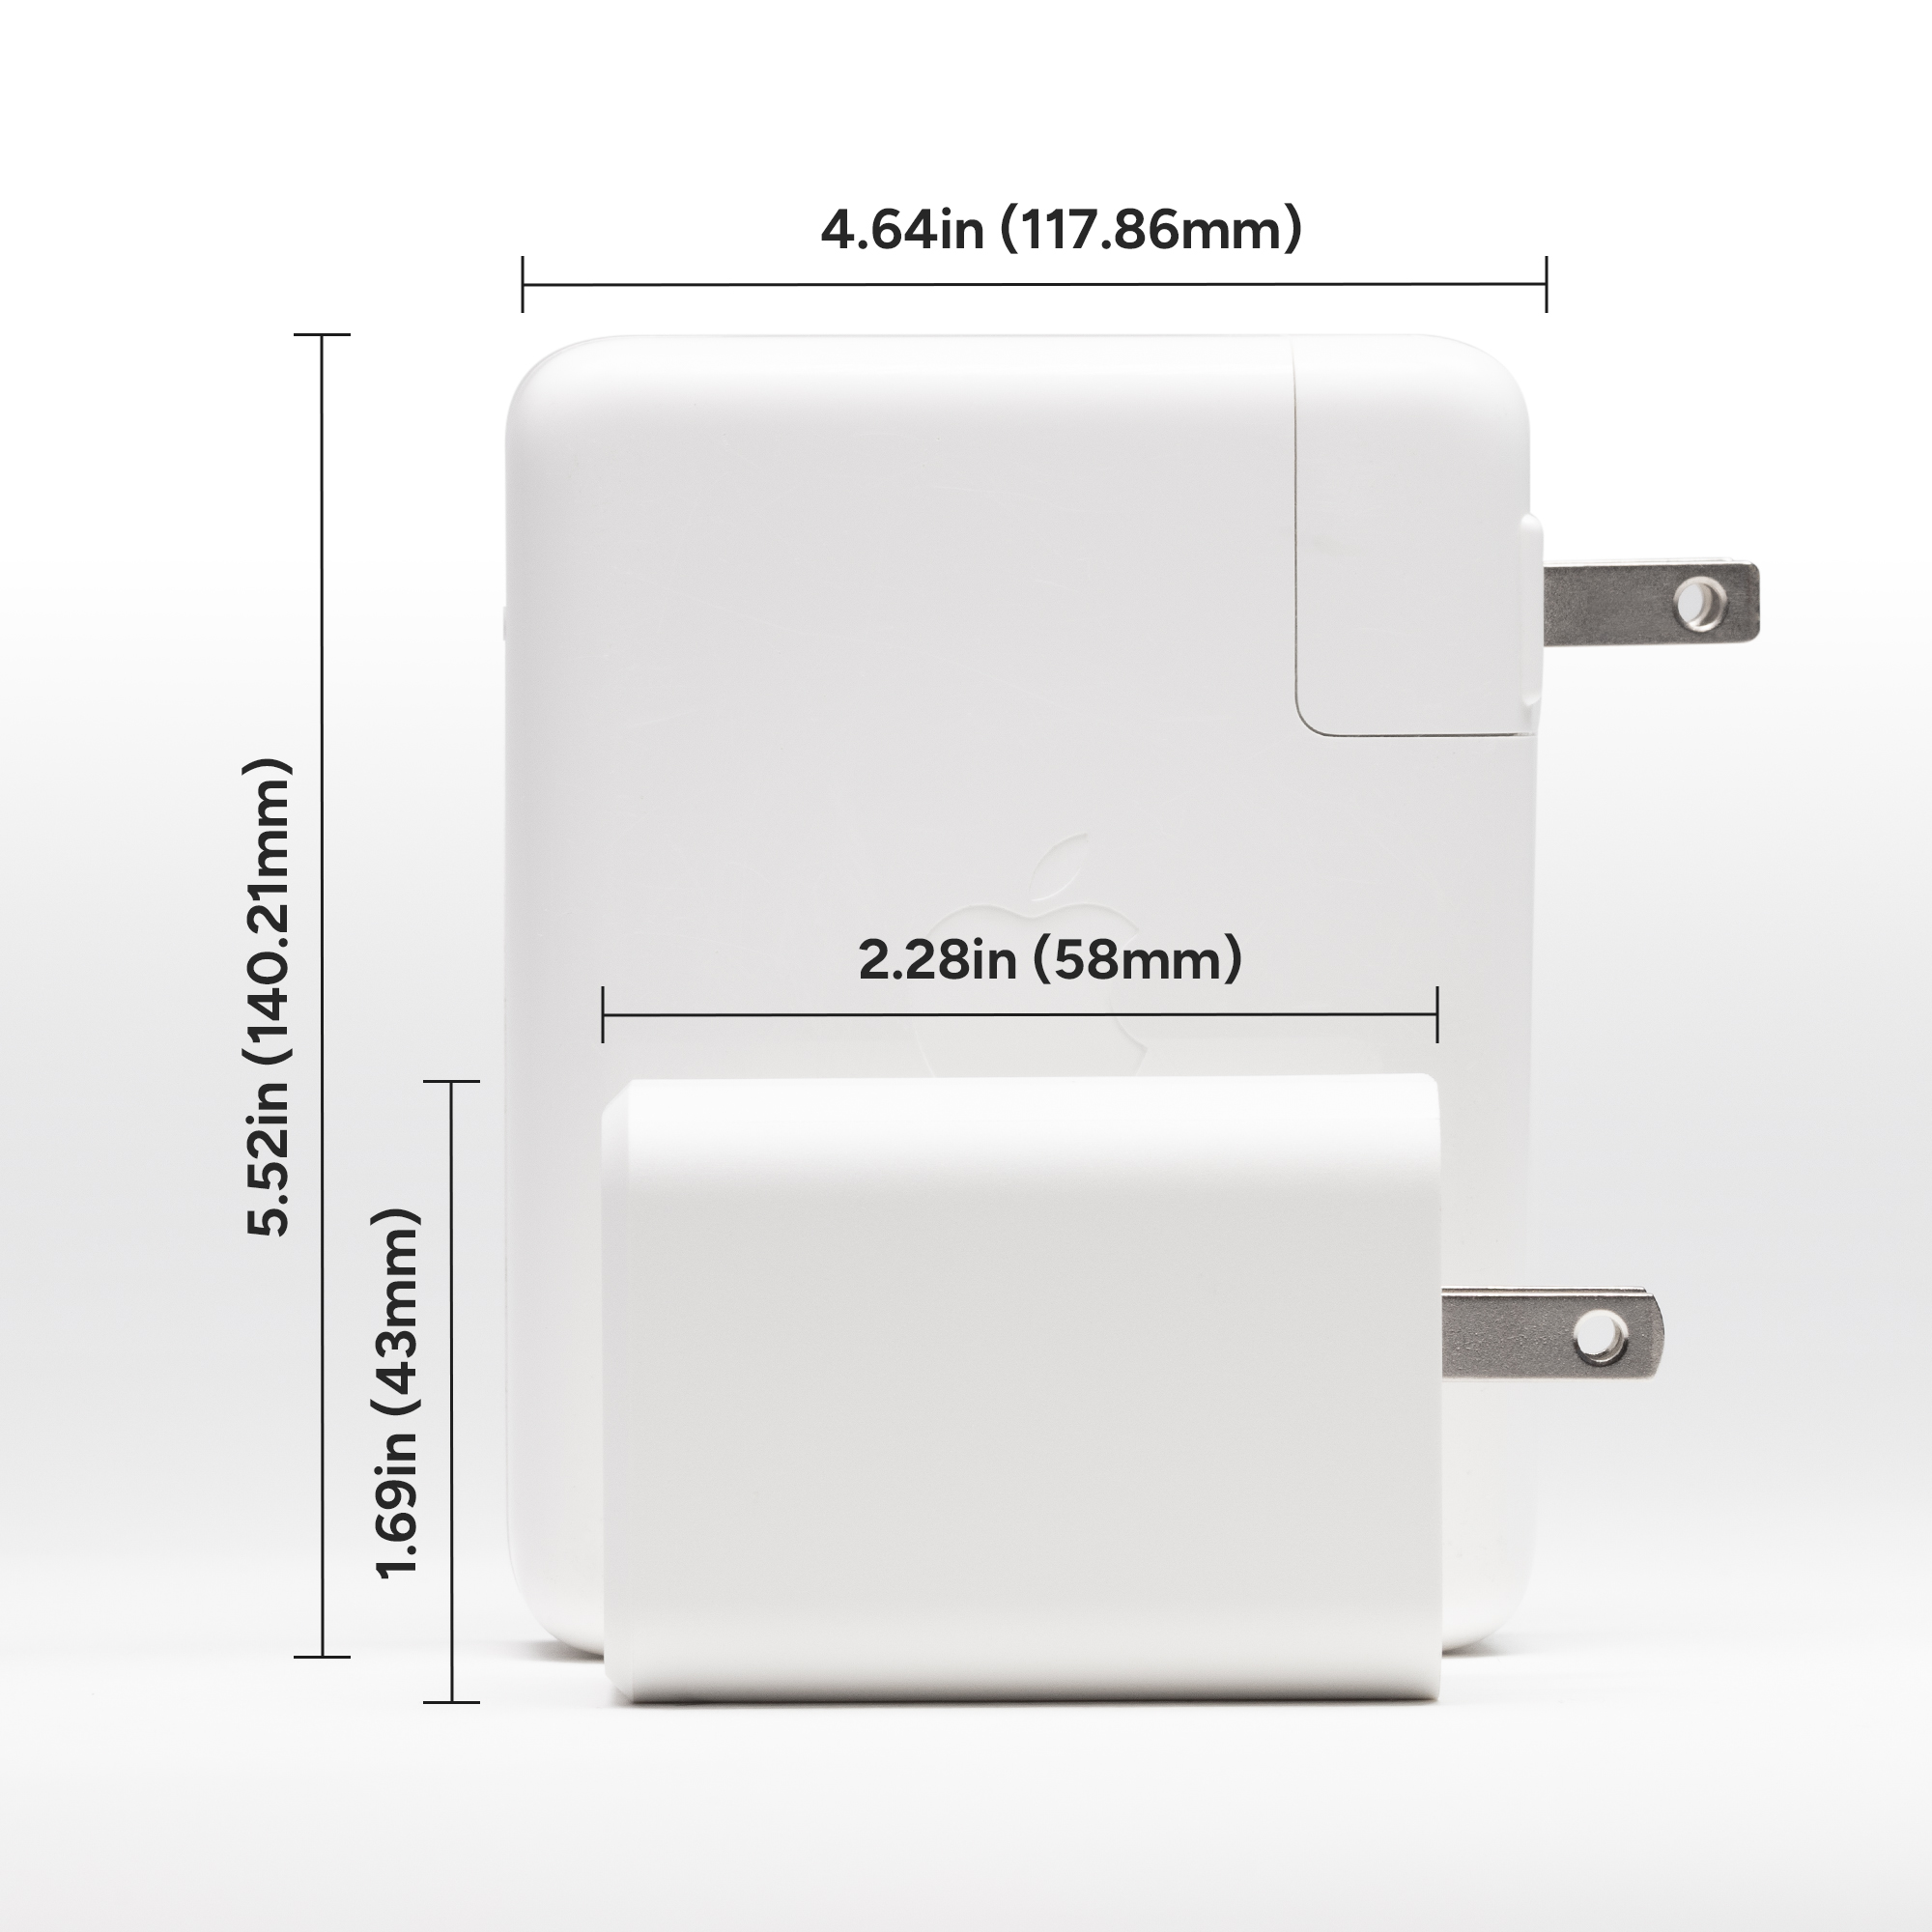 Small, Compact Design||
The speedport 42 is significantly smaller than typical, non-GaN chargers.